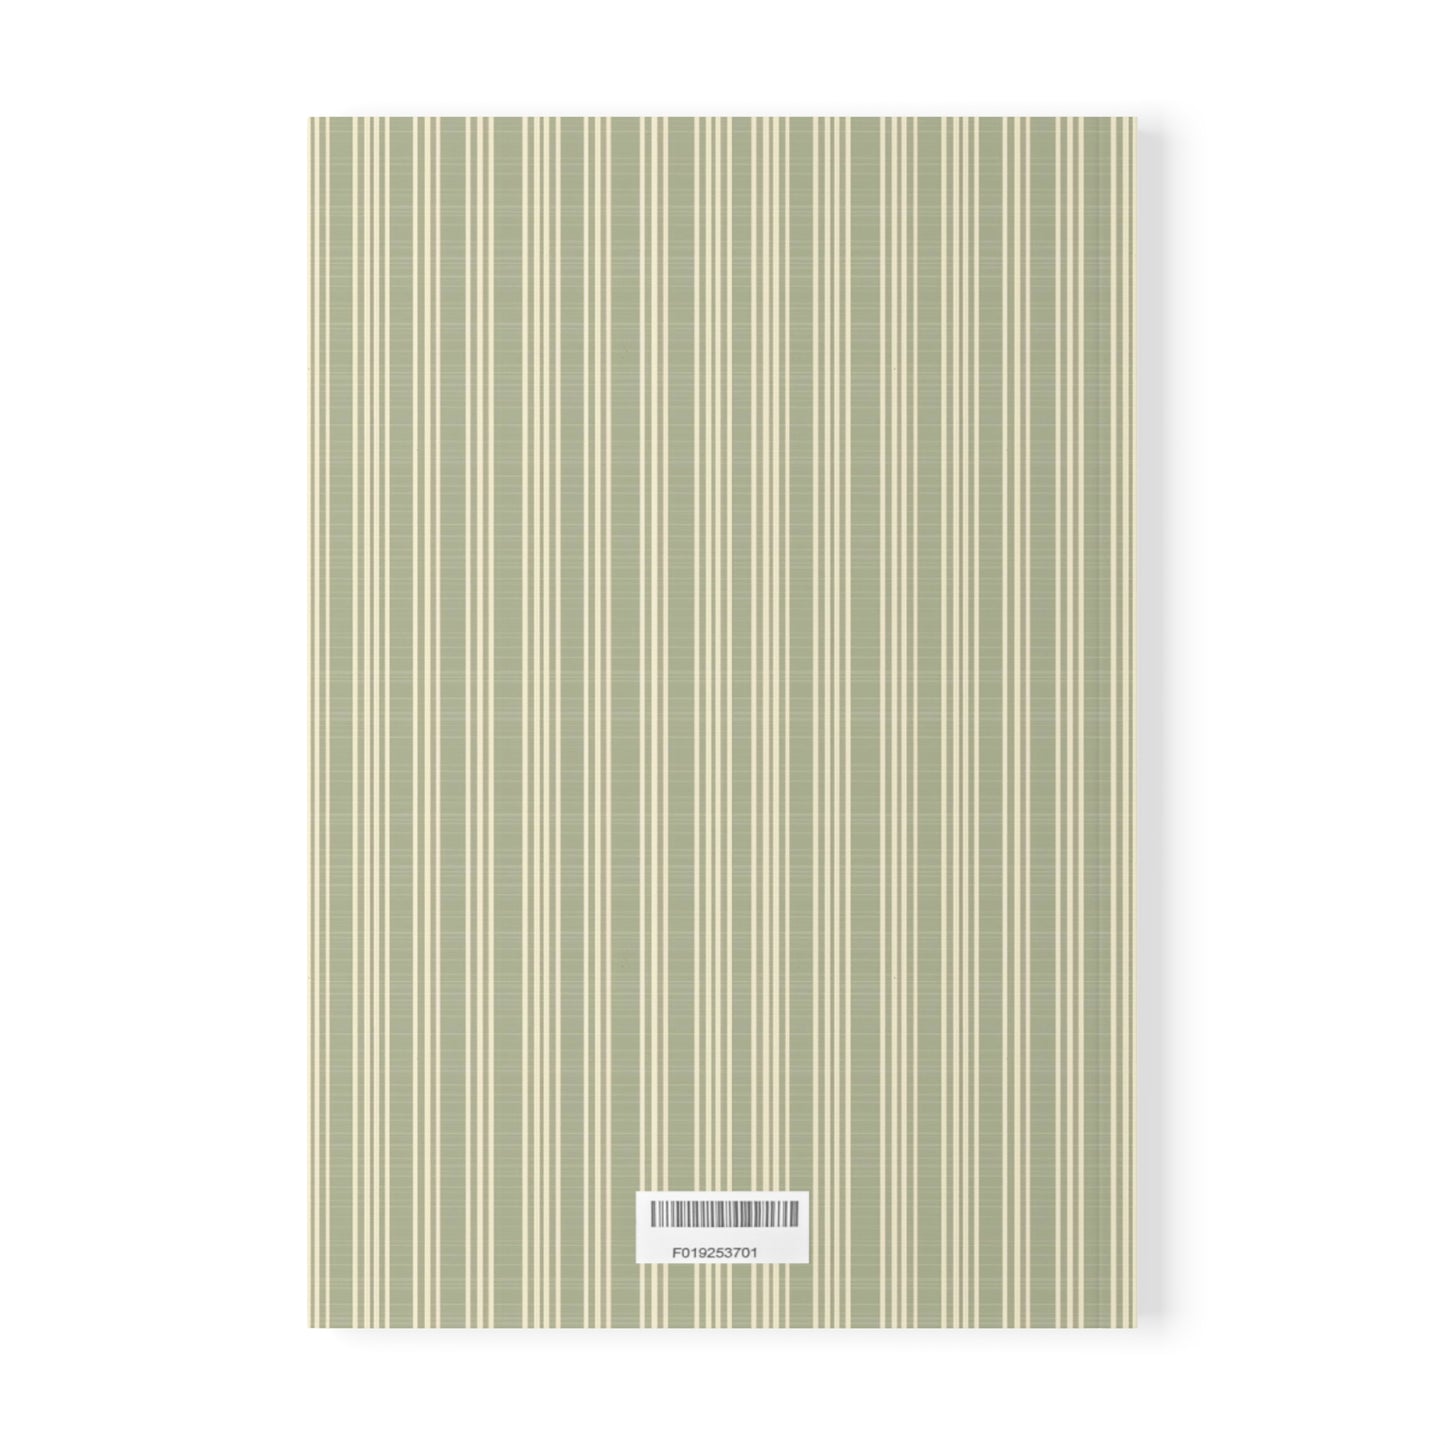 Vampire Art French Grandad Stripes in Khaki Softcover Notebook, A5